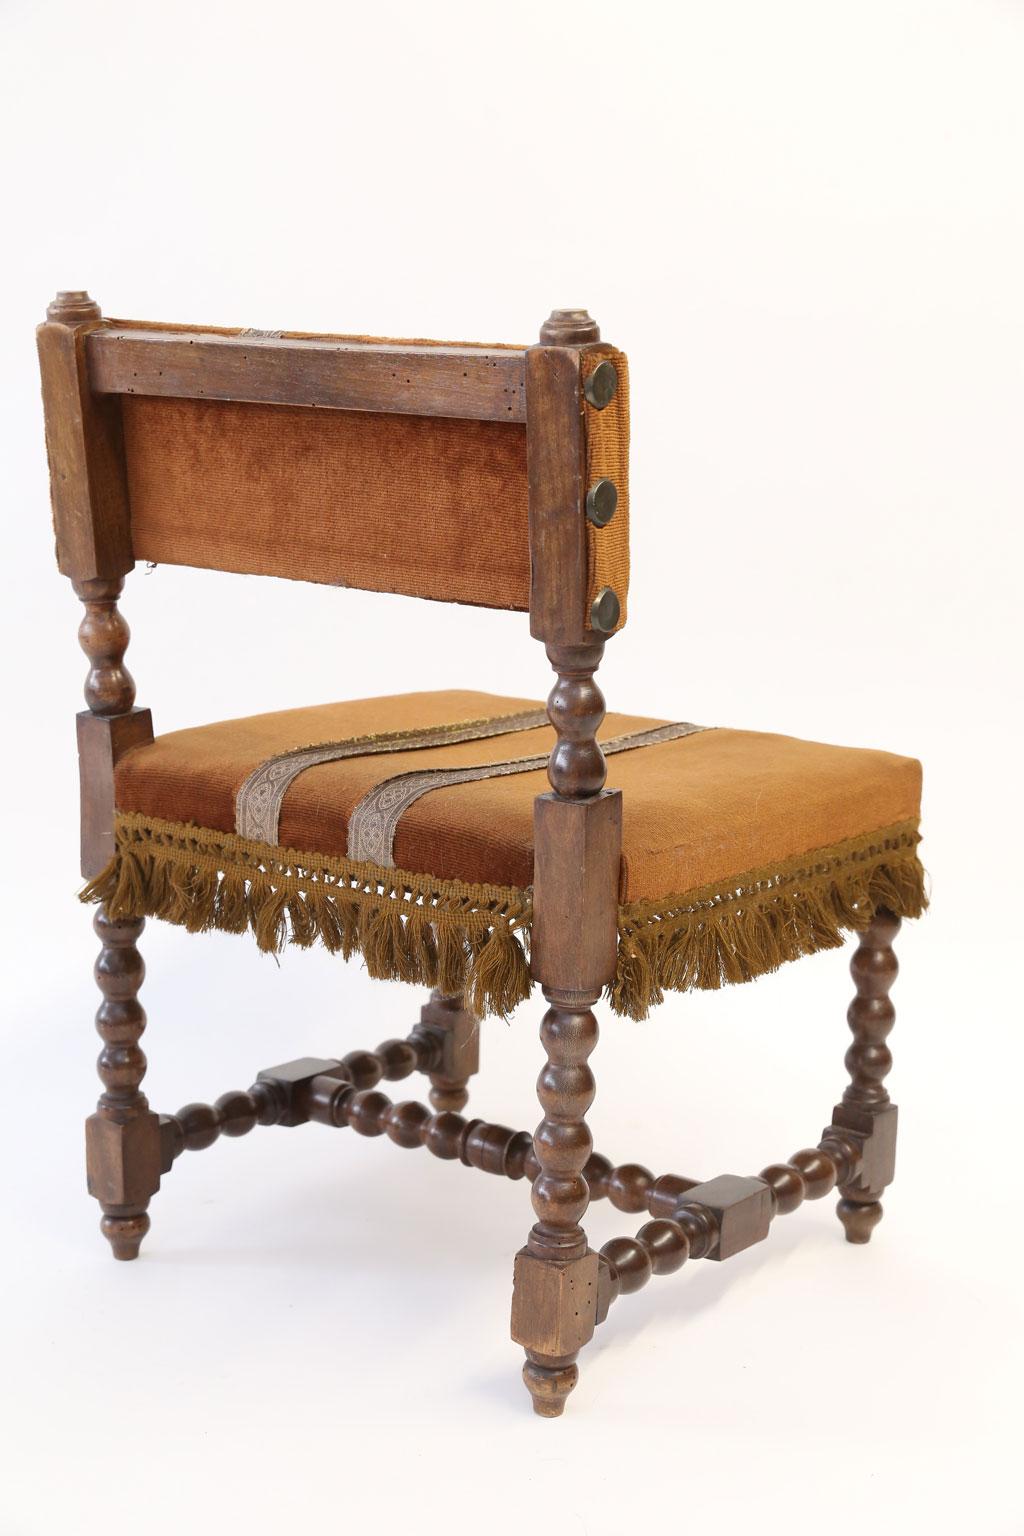 Child-size French chair in Louis XIII style: hand carved walnut in pegged construction with mortise and tenon joints. Almost bobbin-style turned legs and stretcher. Dates to the late 19th century and upholstered in antique fabric.